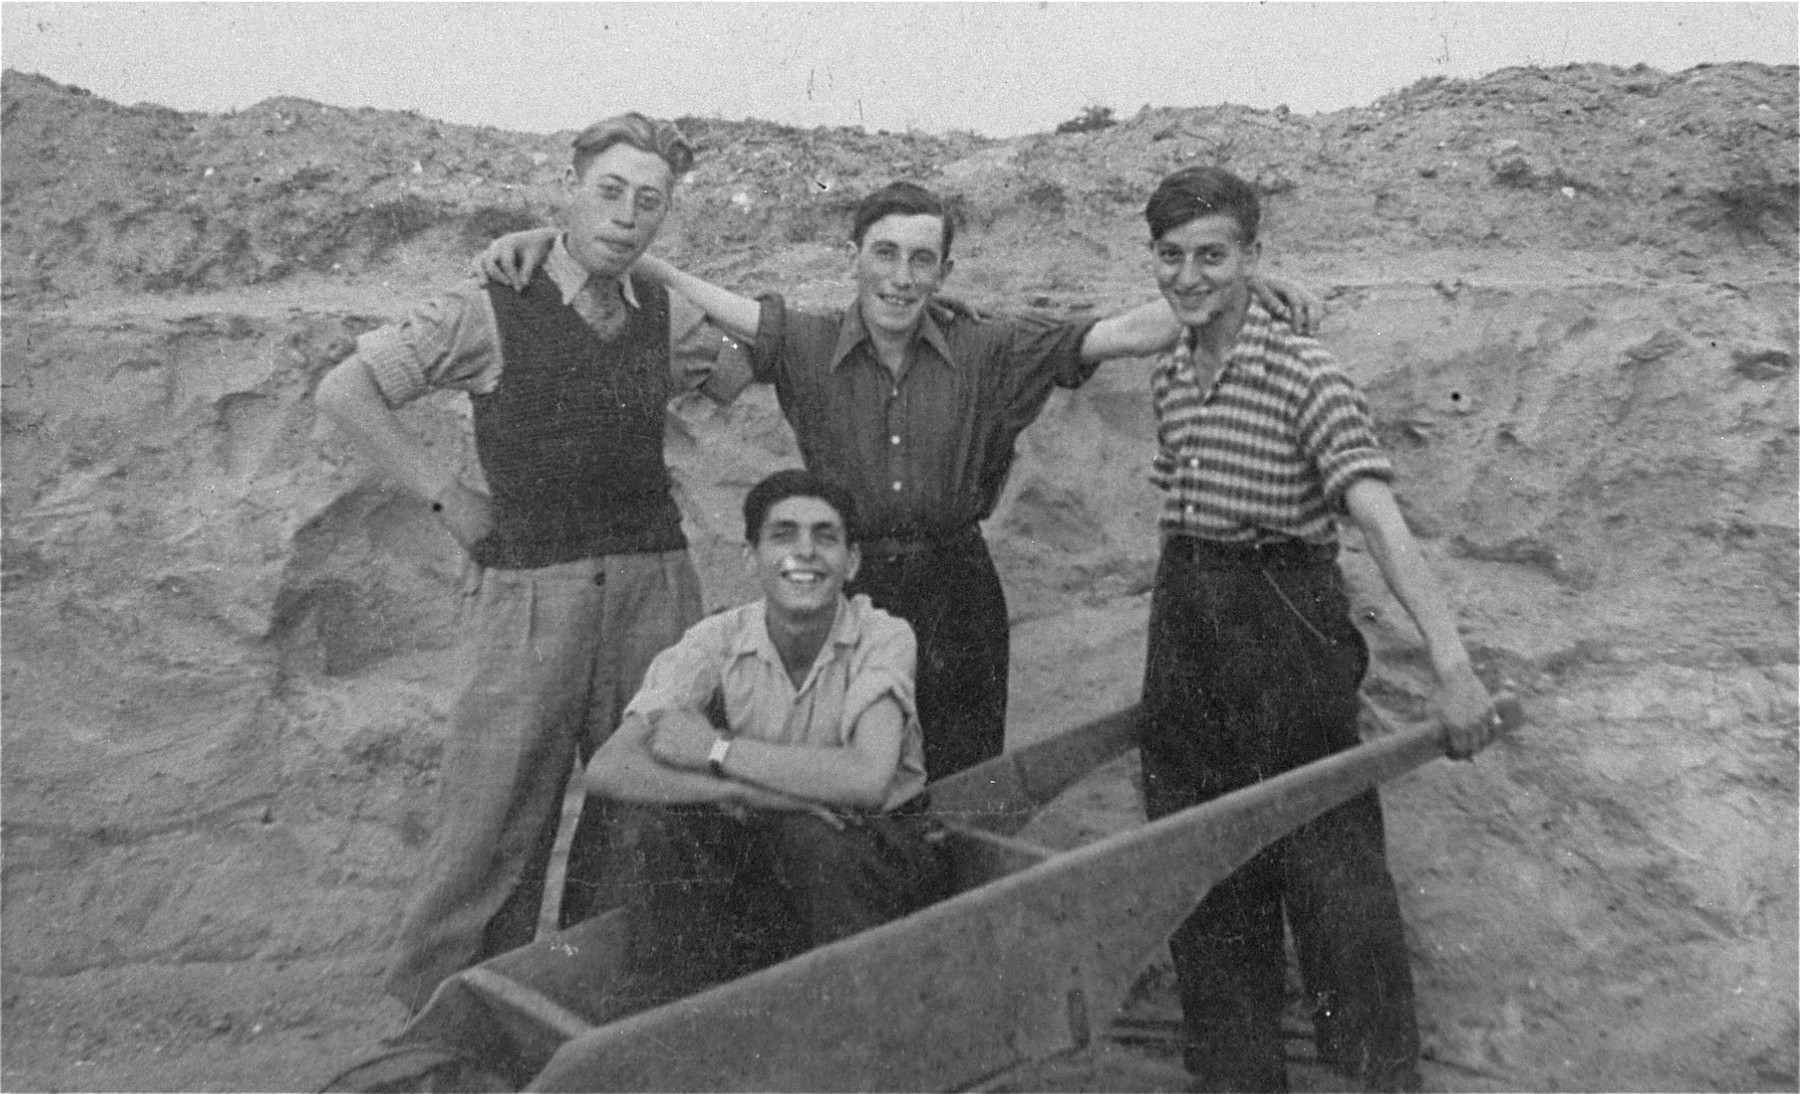 Four members of the Gordonia Zionist youth movement pose in a field in the Marysin quarter of the Lodz ghetto. 

Pictured standing from left to right are: Israel Weinberg, Shlomo Flam and Ariel Schwartz; sitting in the wheelbarrow is Menachem Fogel (who later perished).